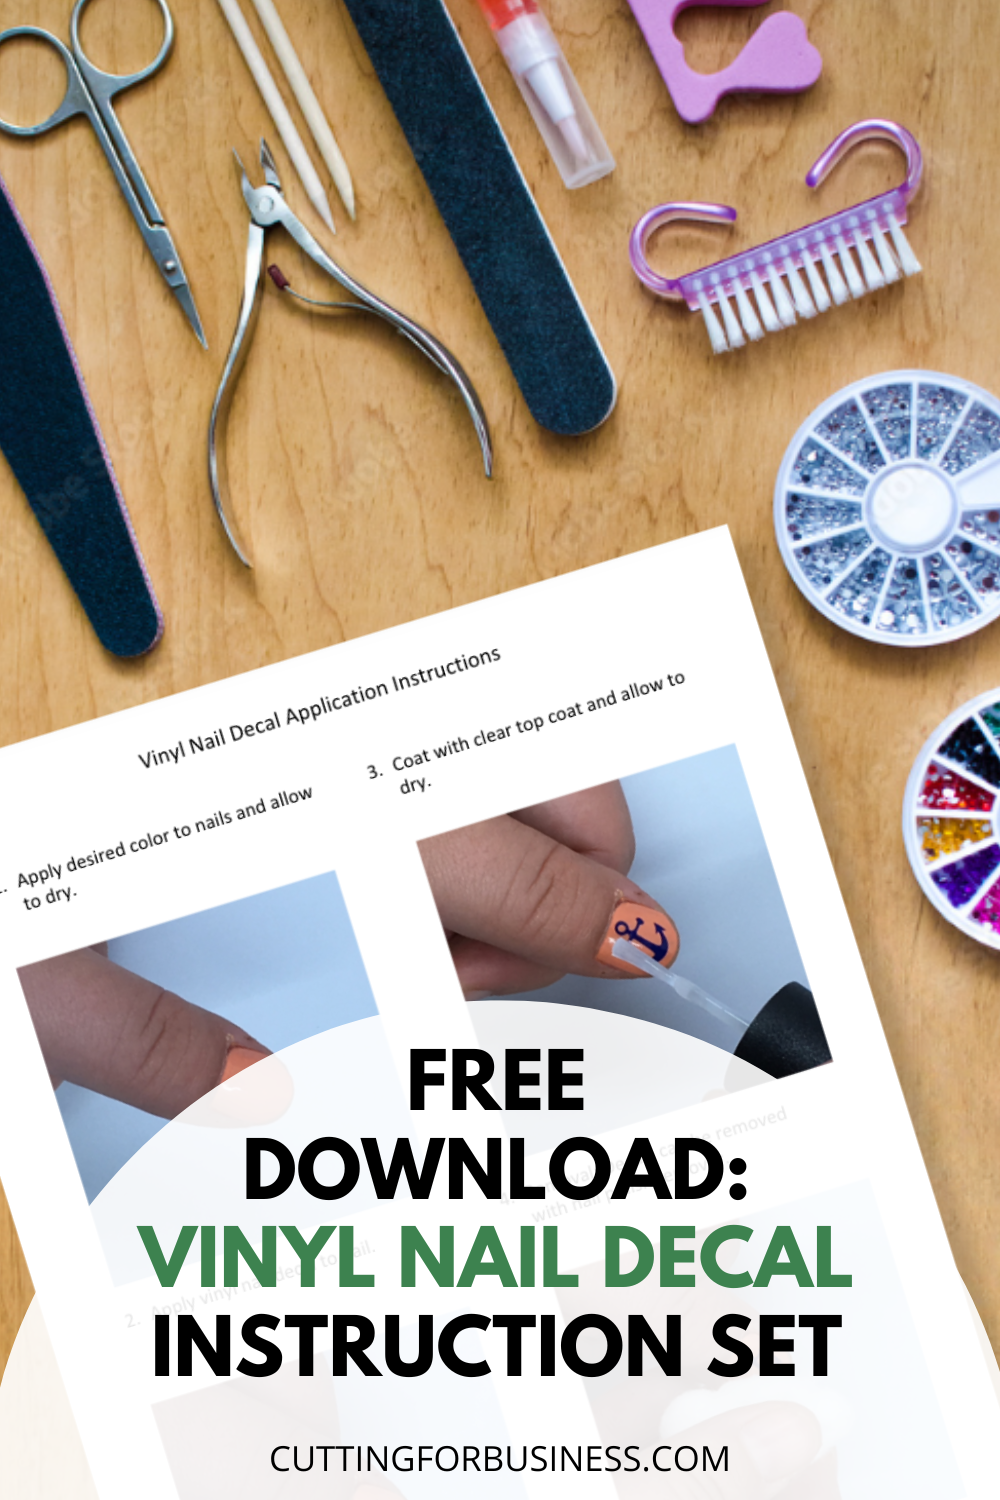 Free Download - Vinyl Nail Decal Instruction Set & 8 Vinyl Nail Decal Tips - cuttingforbusiness.com